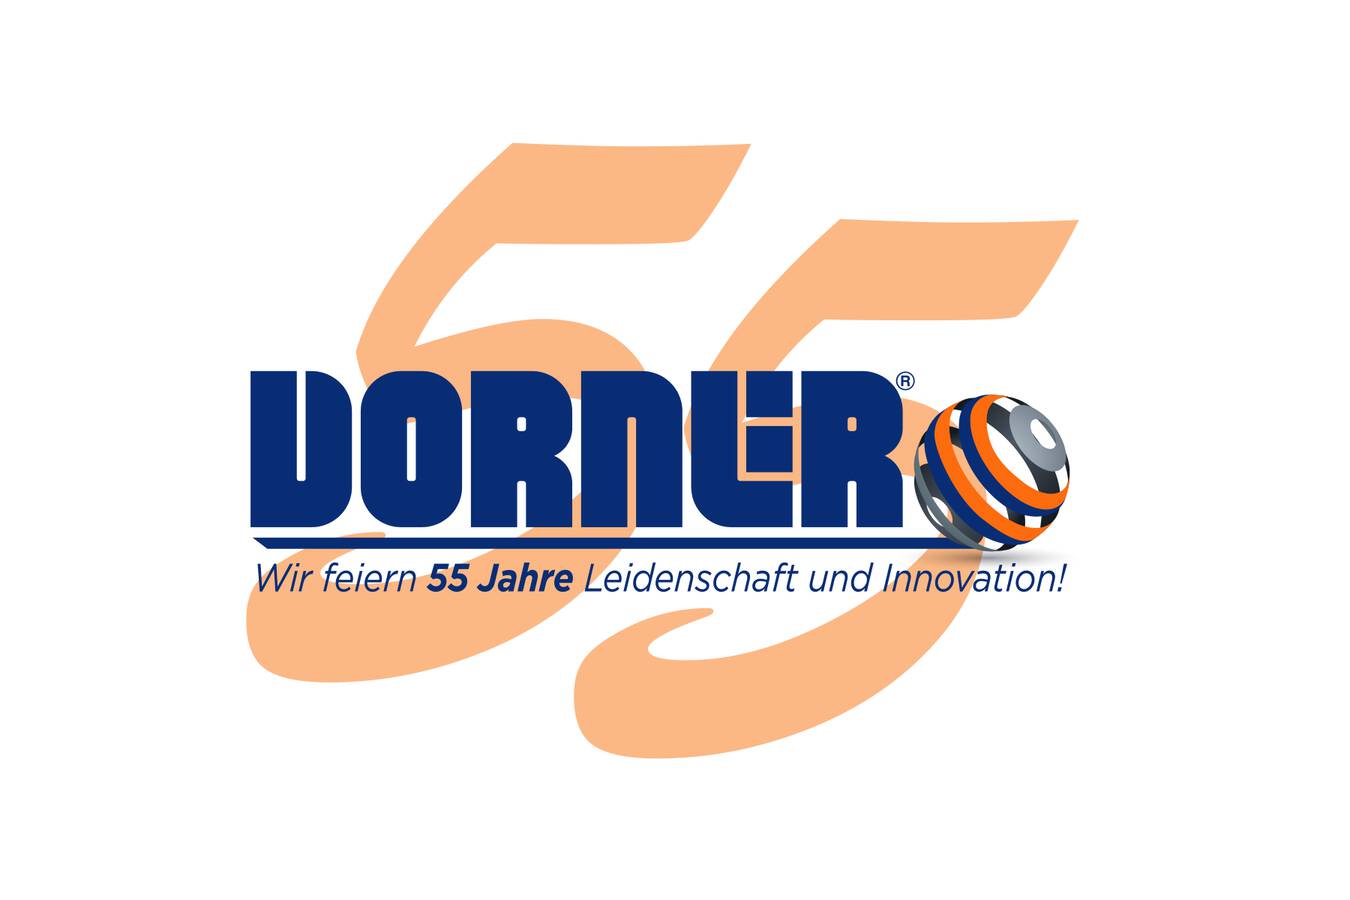 Dorner Conveyors: Celebrating 55 years of passion and innovation Dorner Celebrates its 55th Anniversary as an Industry Leader of Conveyor Systems